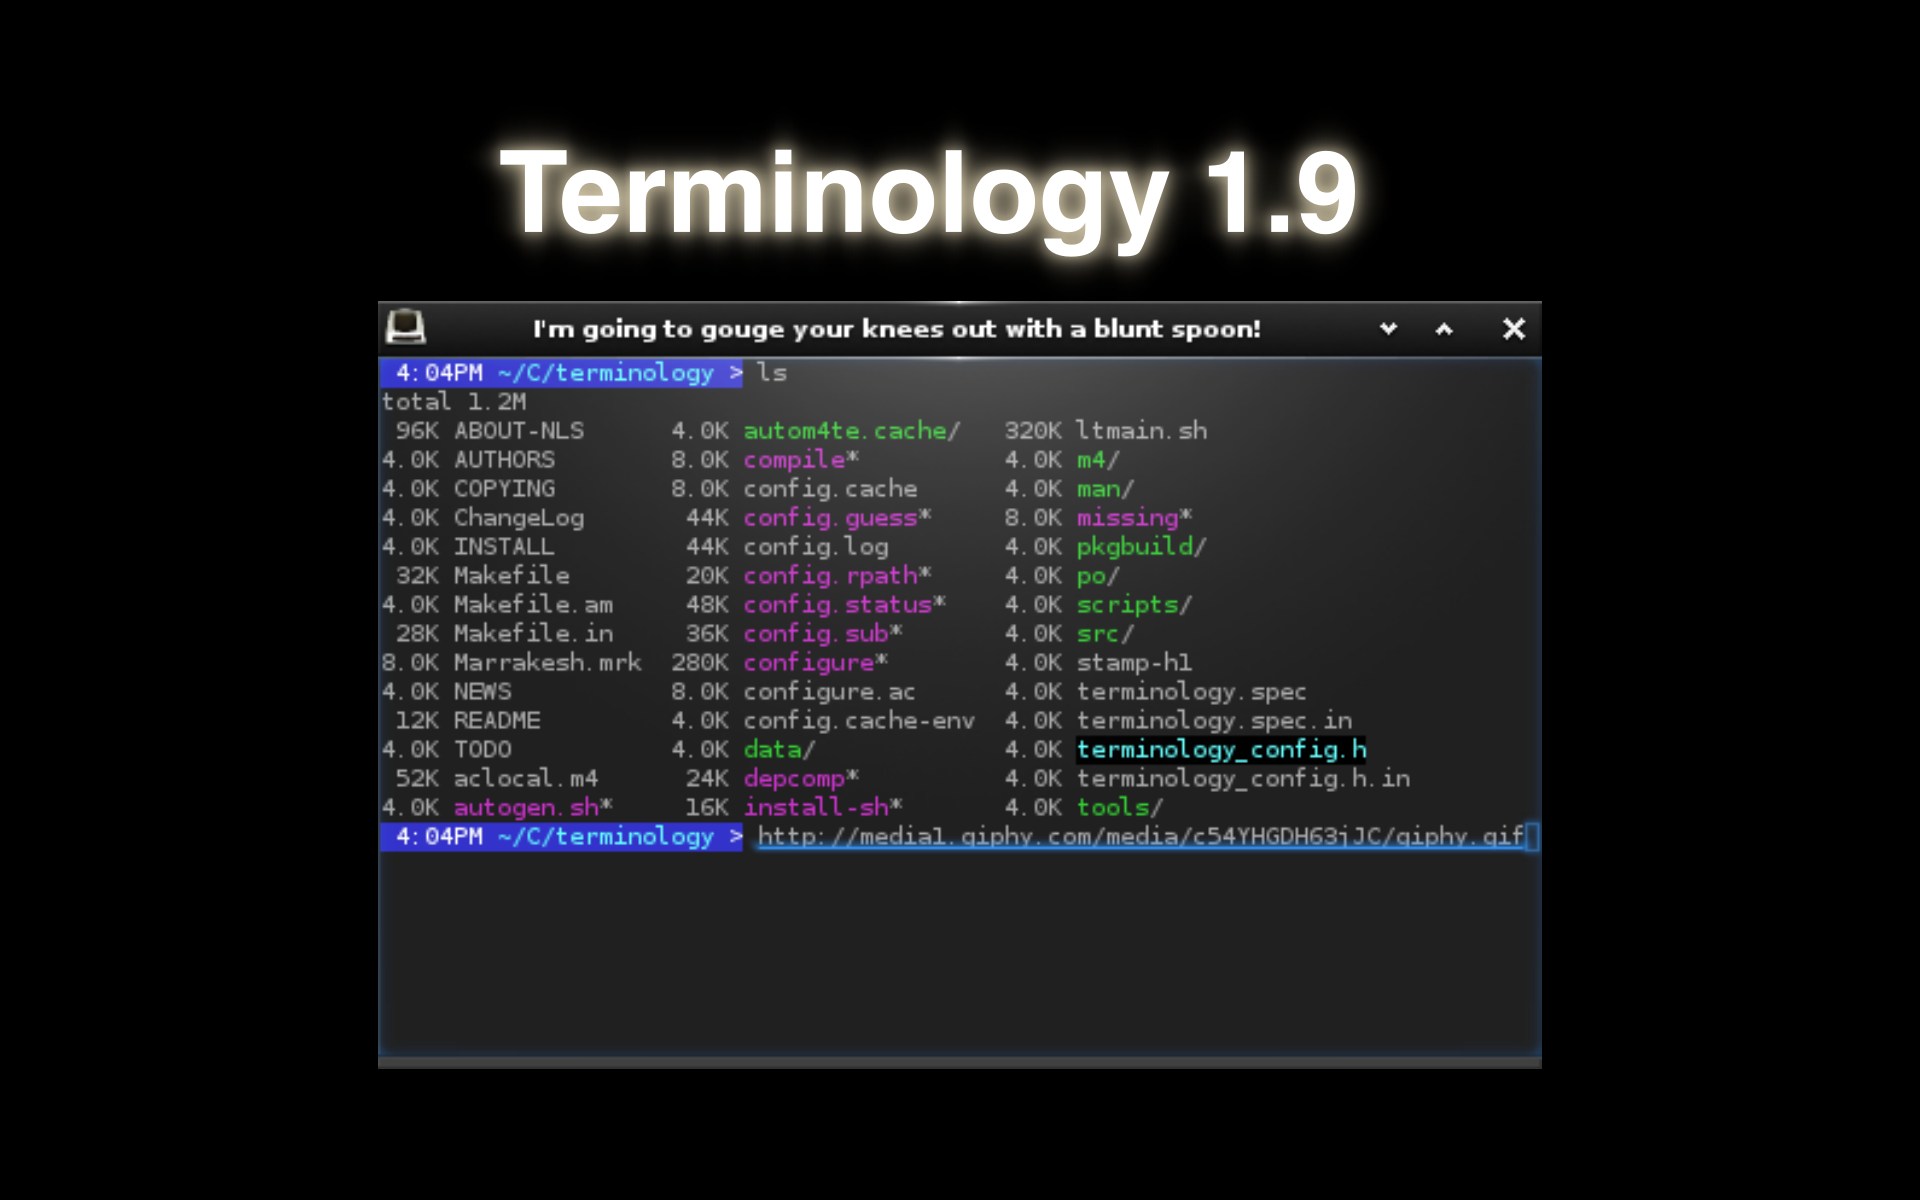 Terminology 1.9 Terminal Emulator Works Better with Debian-Based Systems